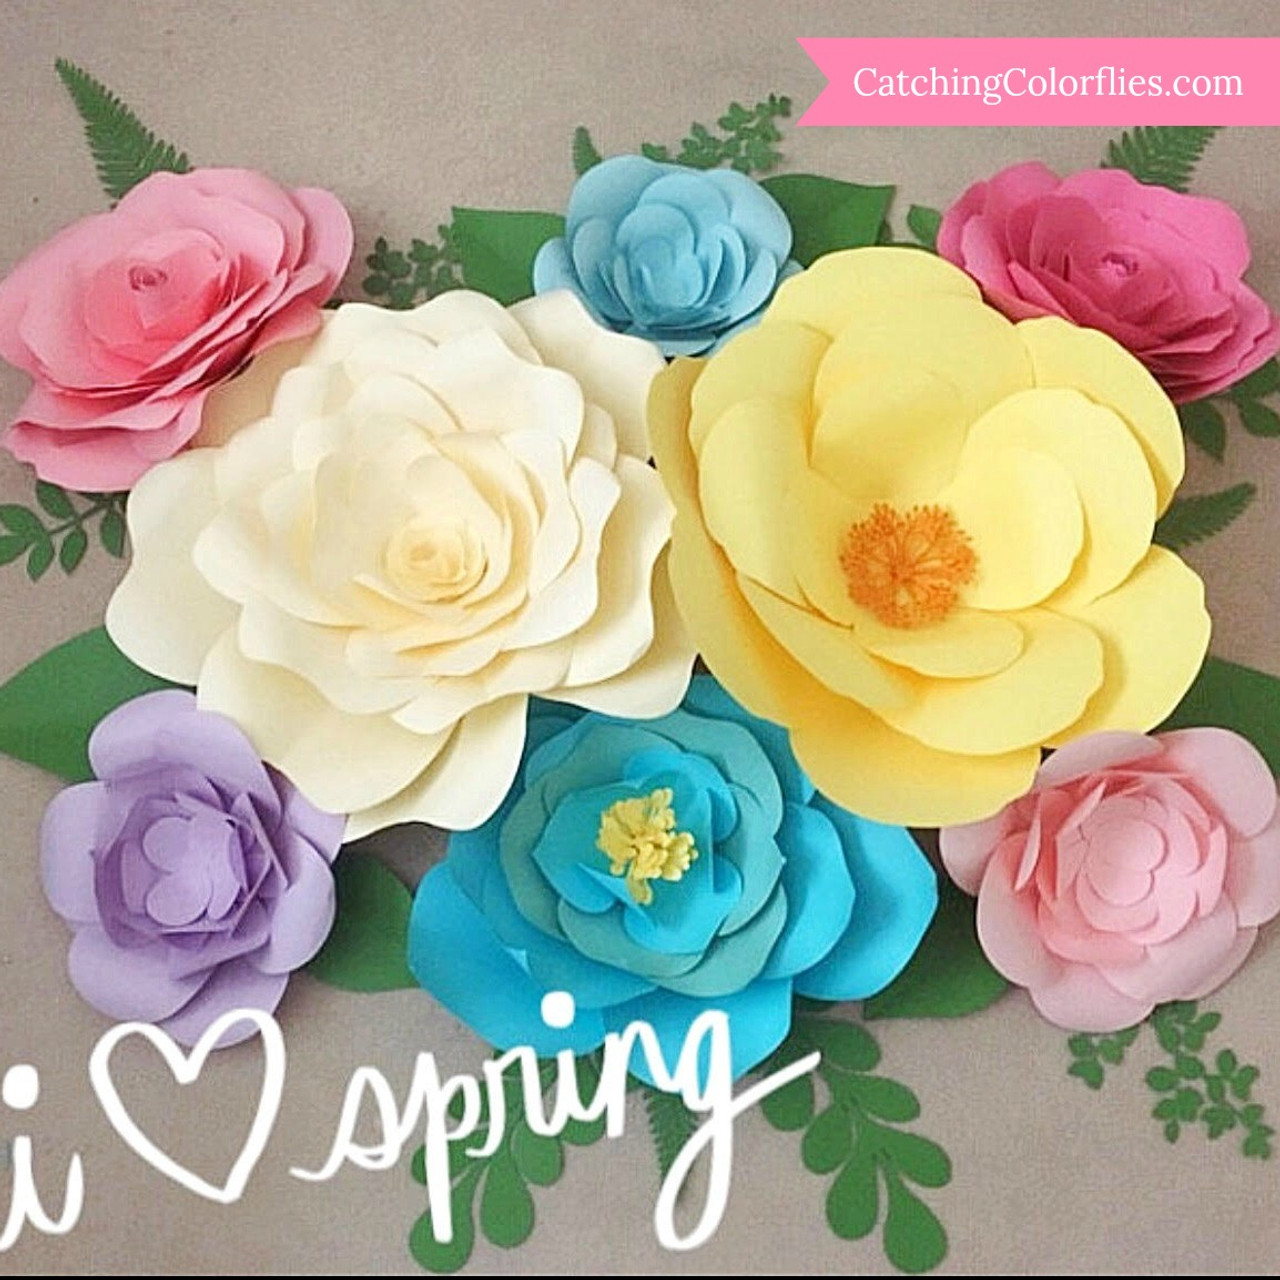 Download Springtime Set Of Large Paper Flower Templates Catching Colorflies